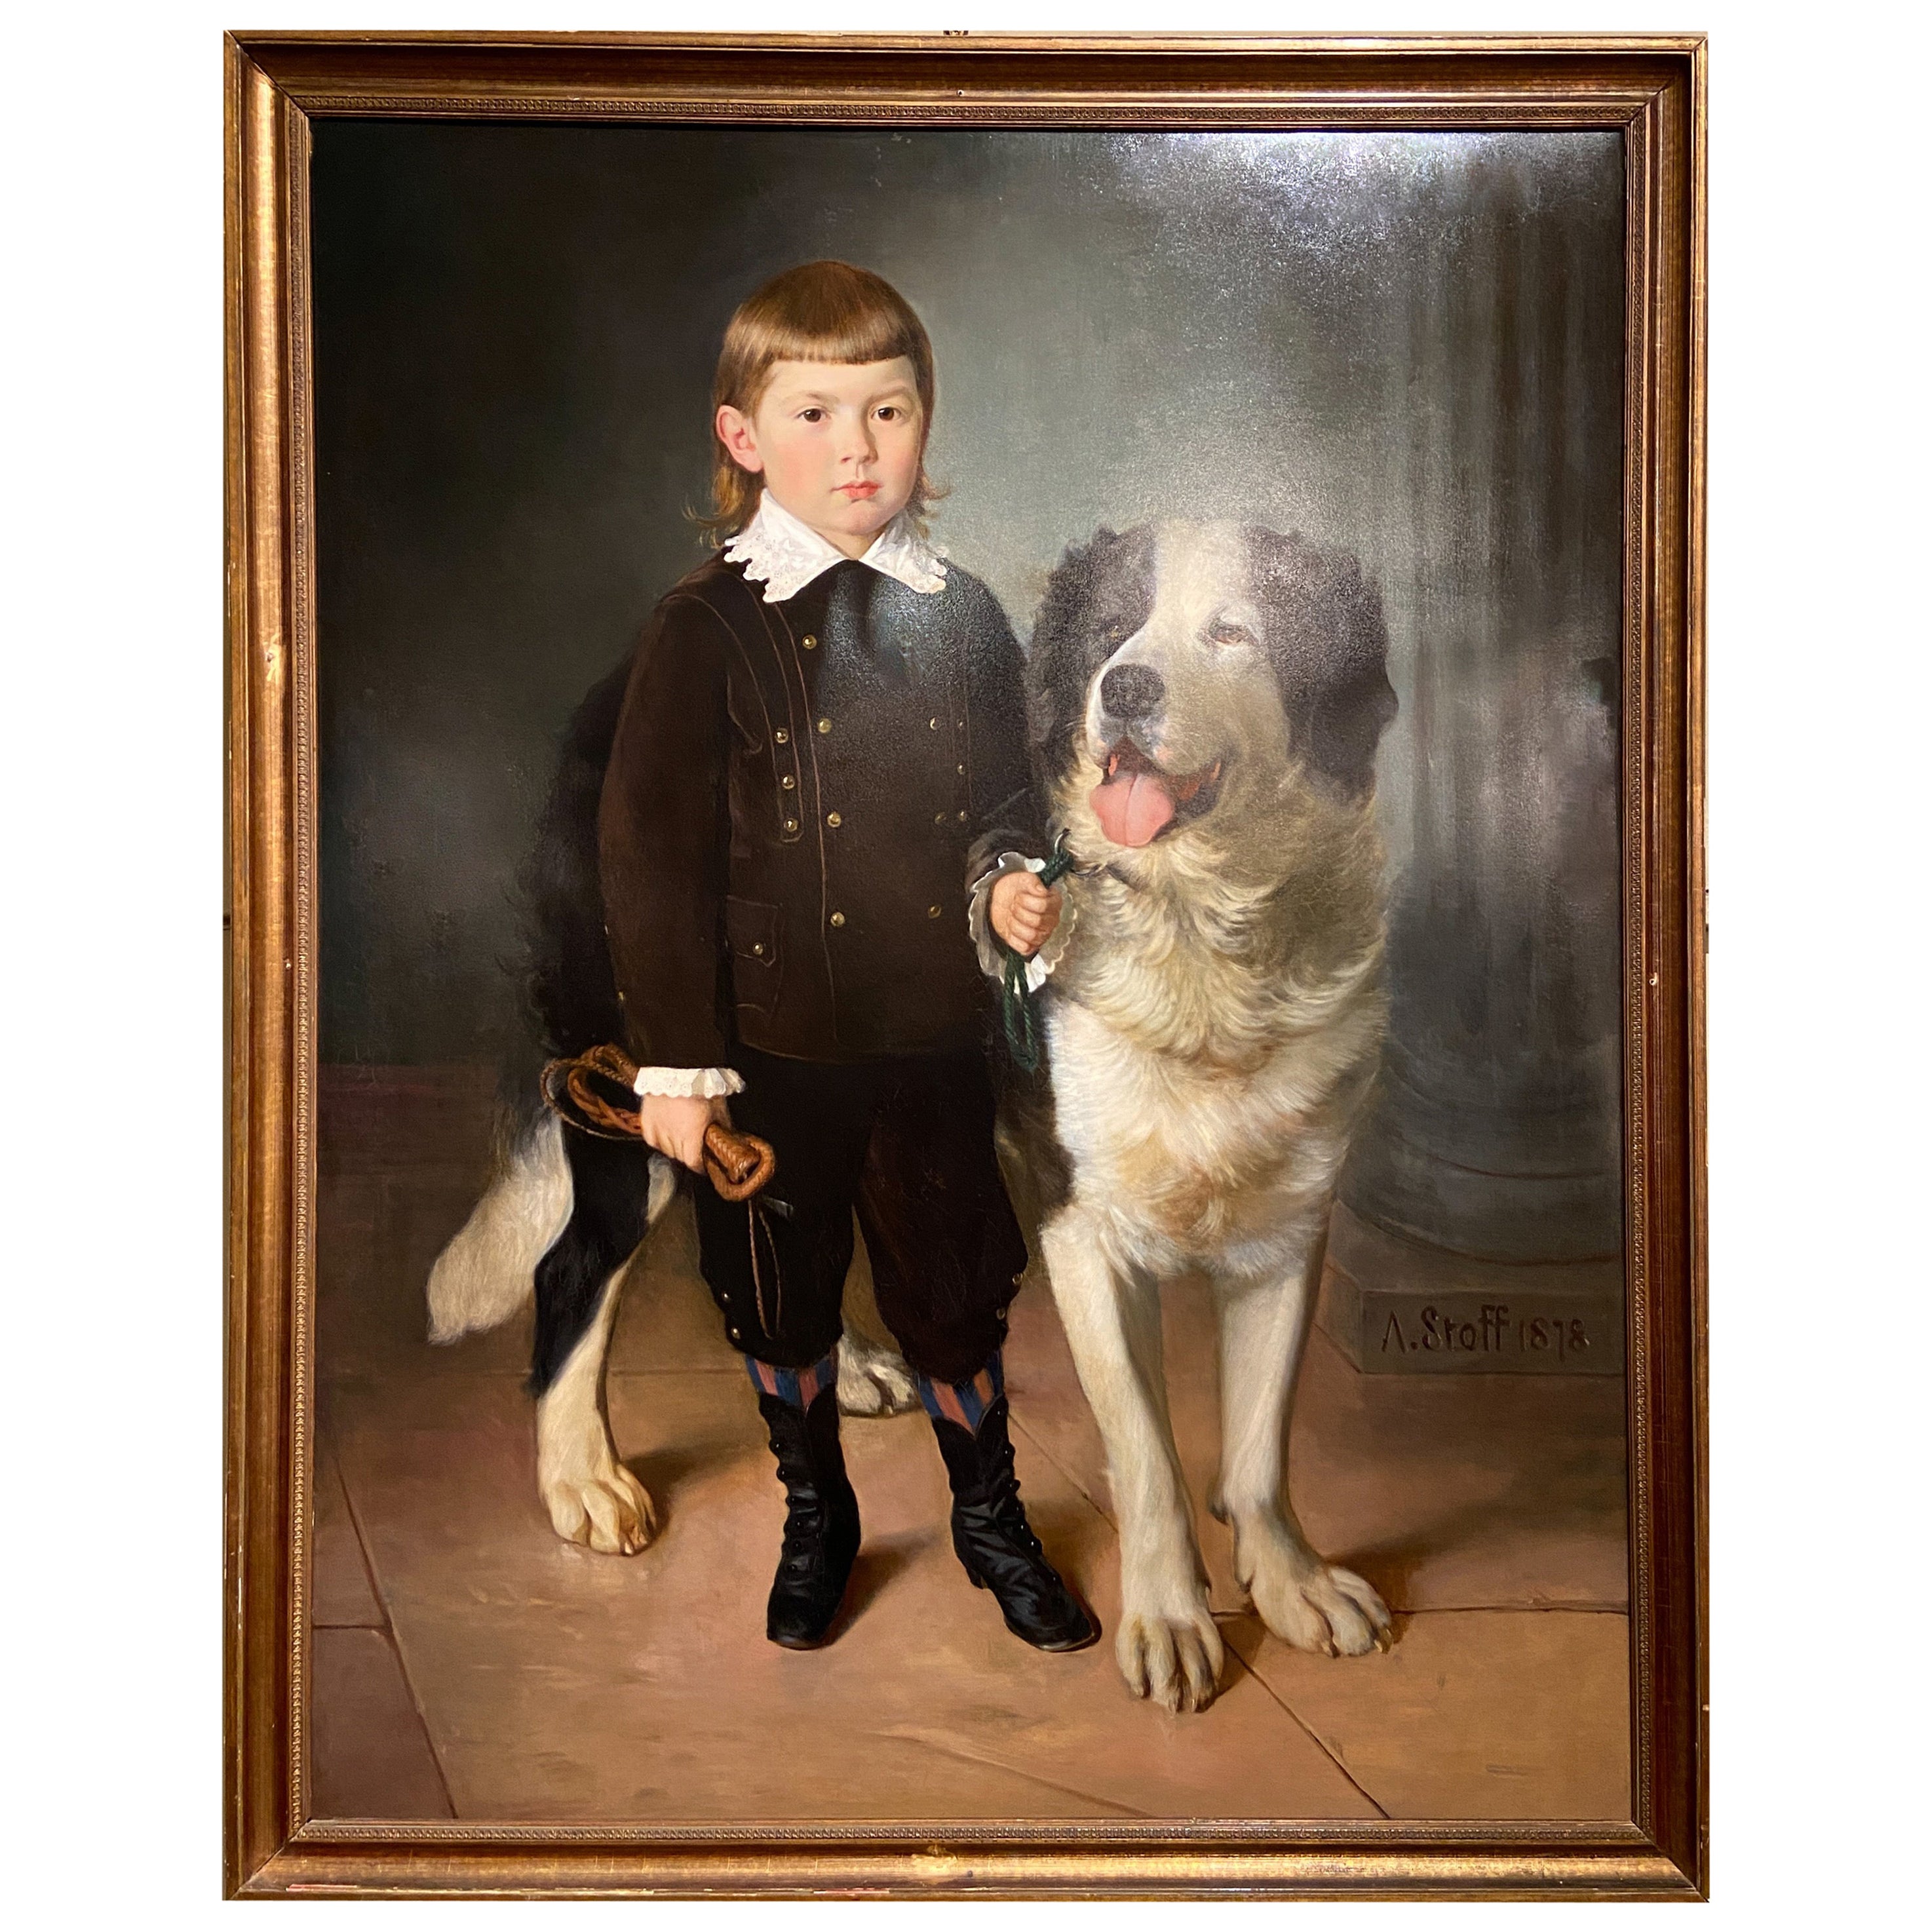 Antique Austrian Portrait Oil Painting of Boy and Dog Signed, "A. Stoff 1878." For Sale